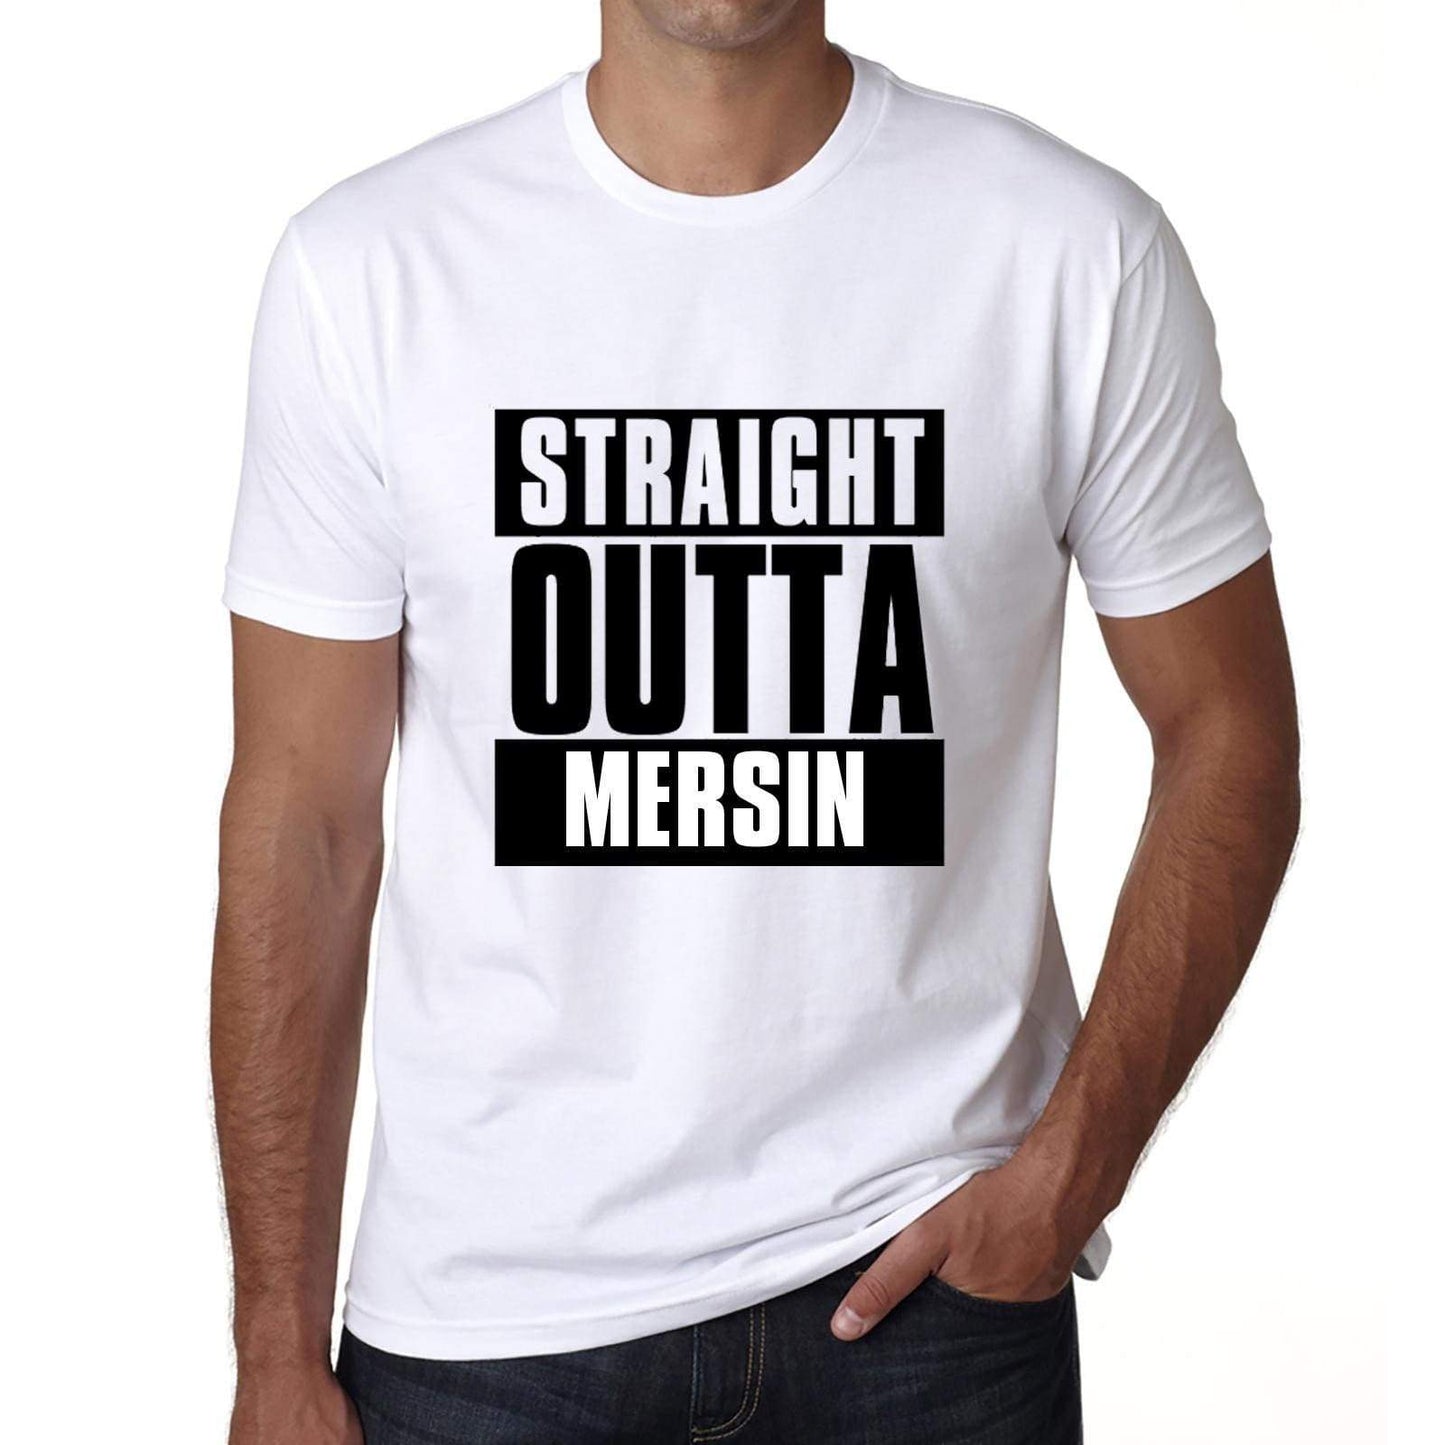 Straight Outta Mersin Mens Short Sleeve Round Neck T-Shirt 00027 - White / S - Casual